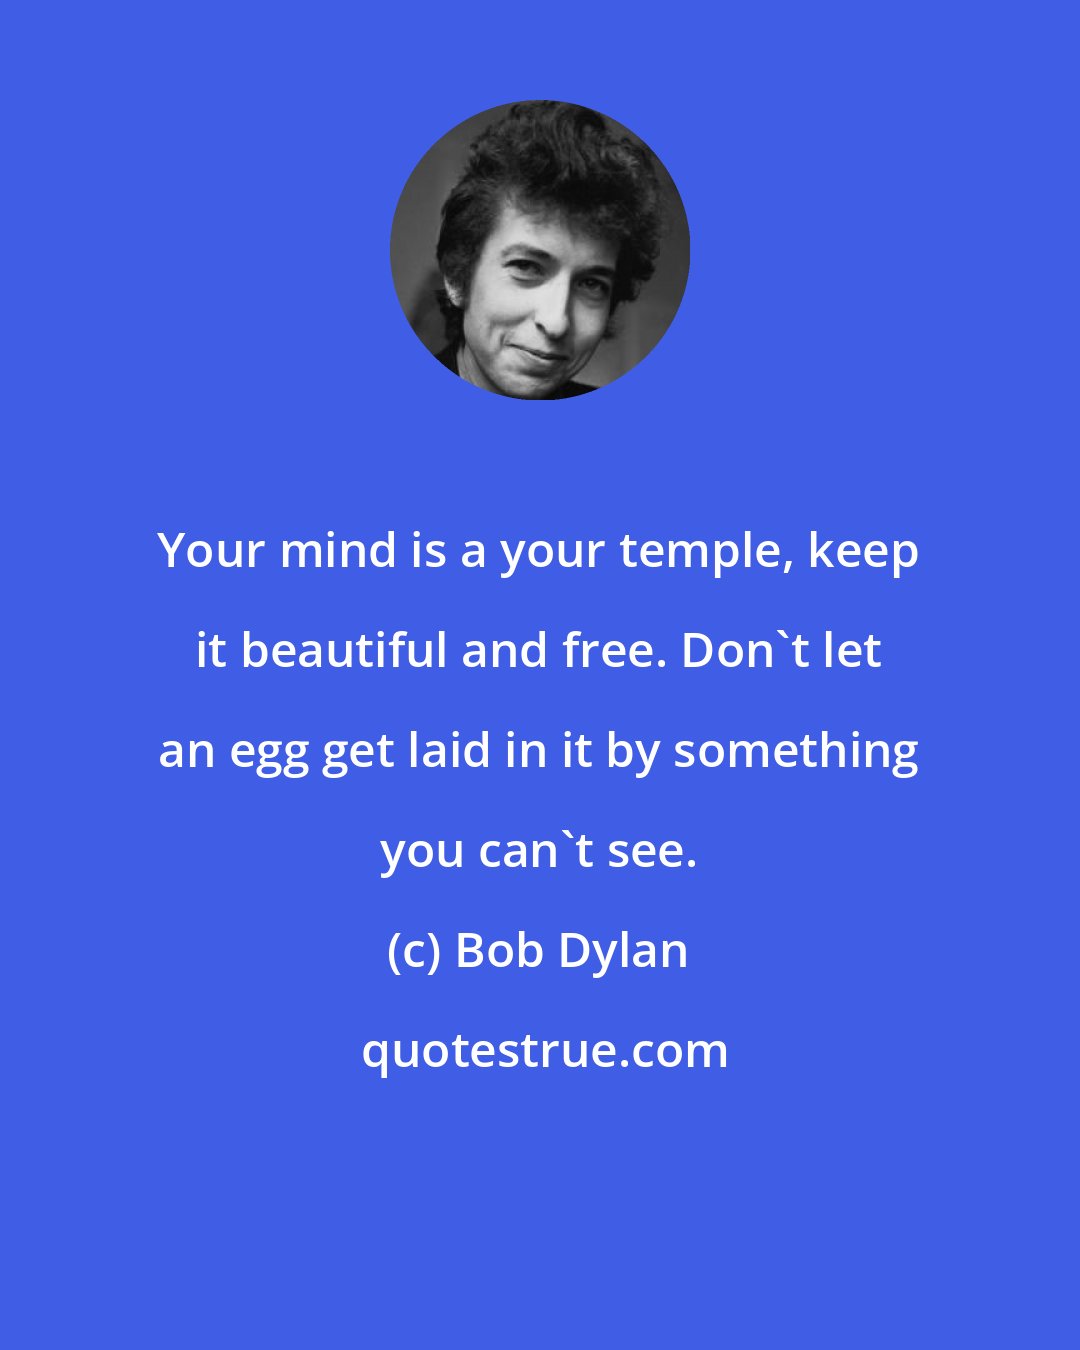 Bob Dylan: Your mind is a your temple, keep it beautiful and free. Don't let an egg get laid in it by something you can't see.